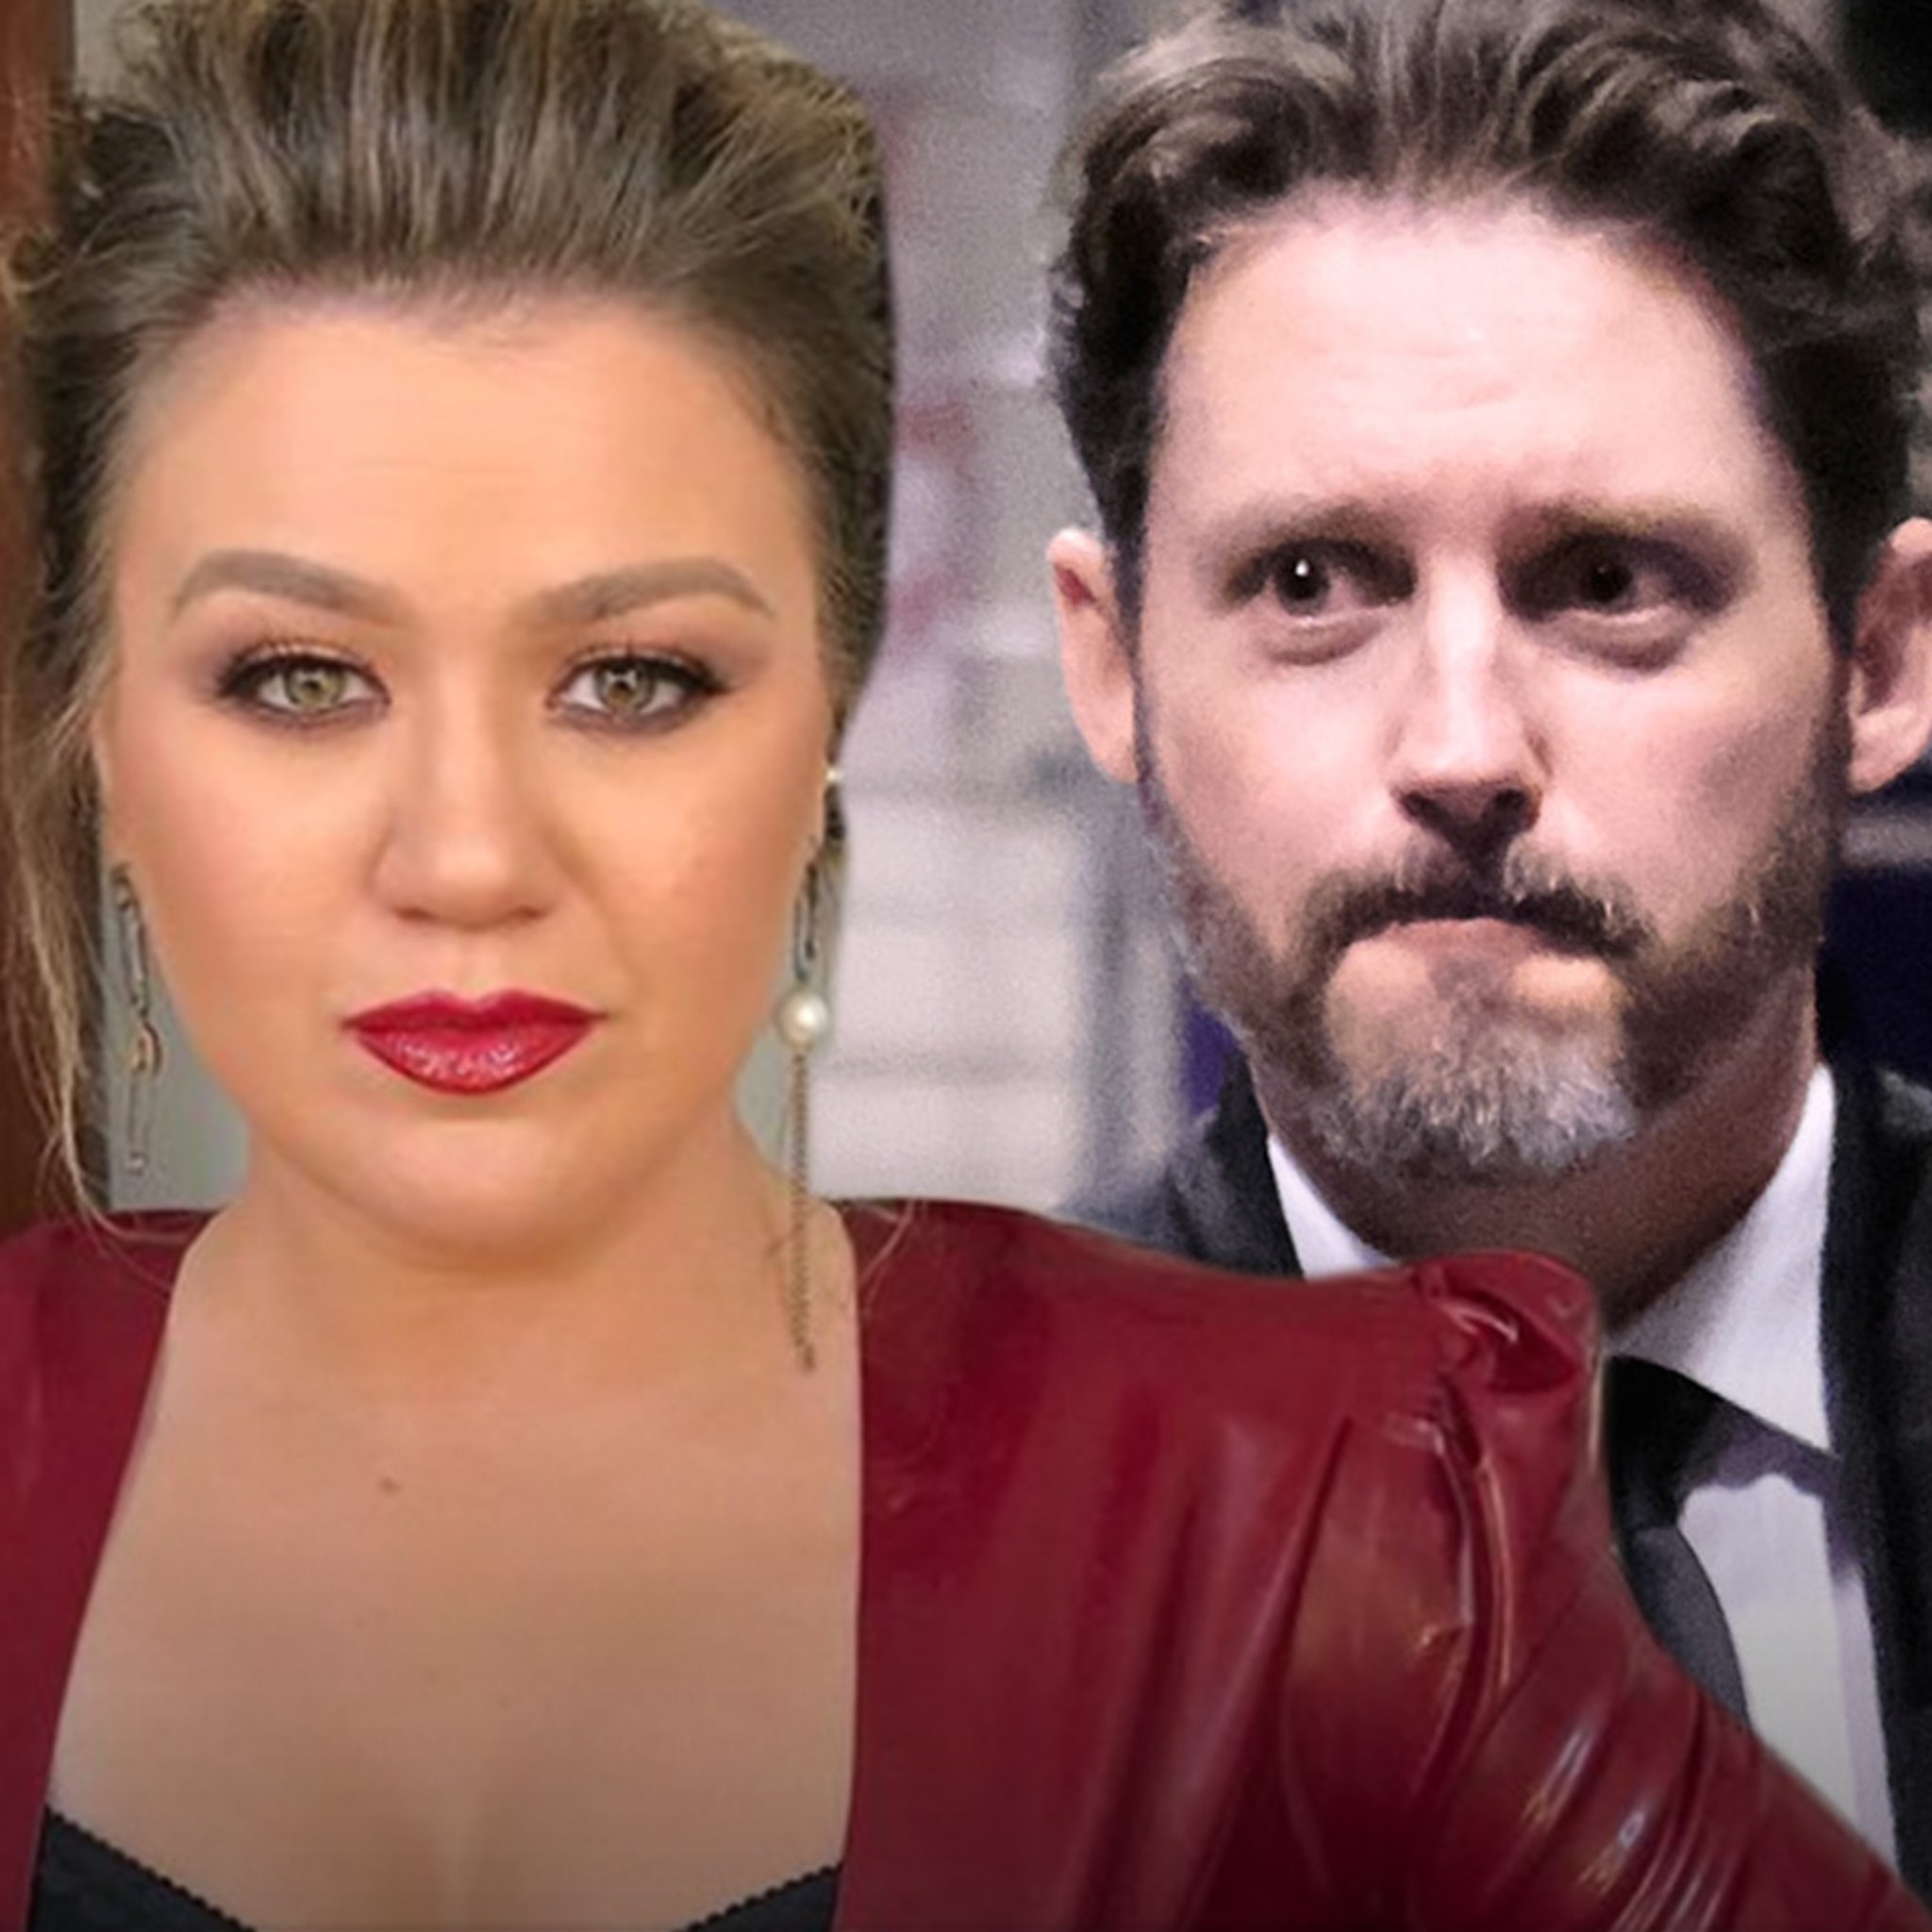 Kelly Clarkson Reveals What She Texted Ex Husband About Her Divorce Album